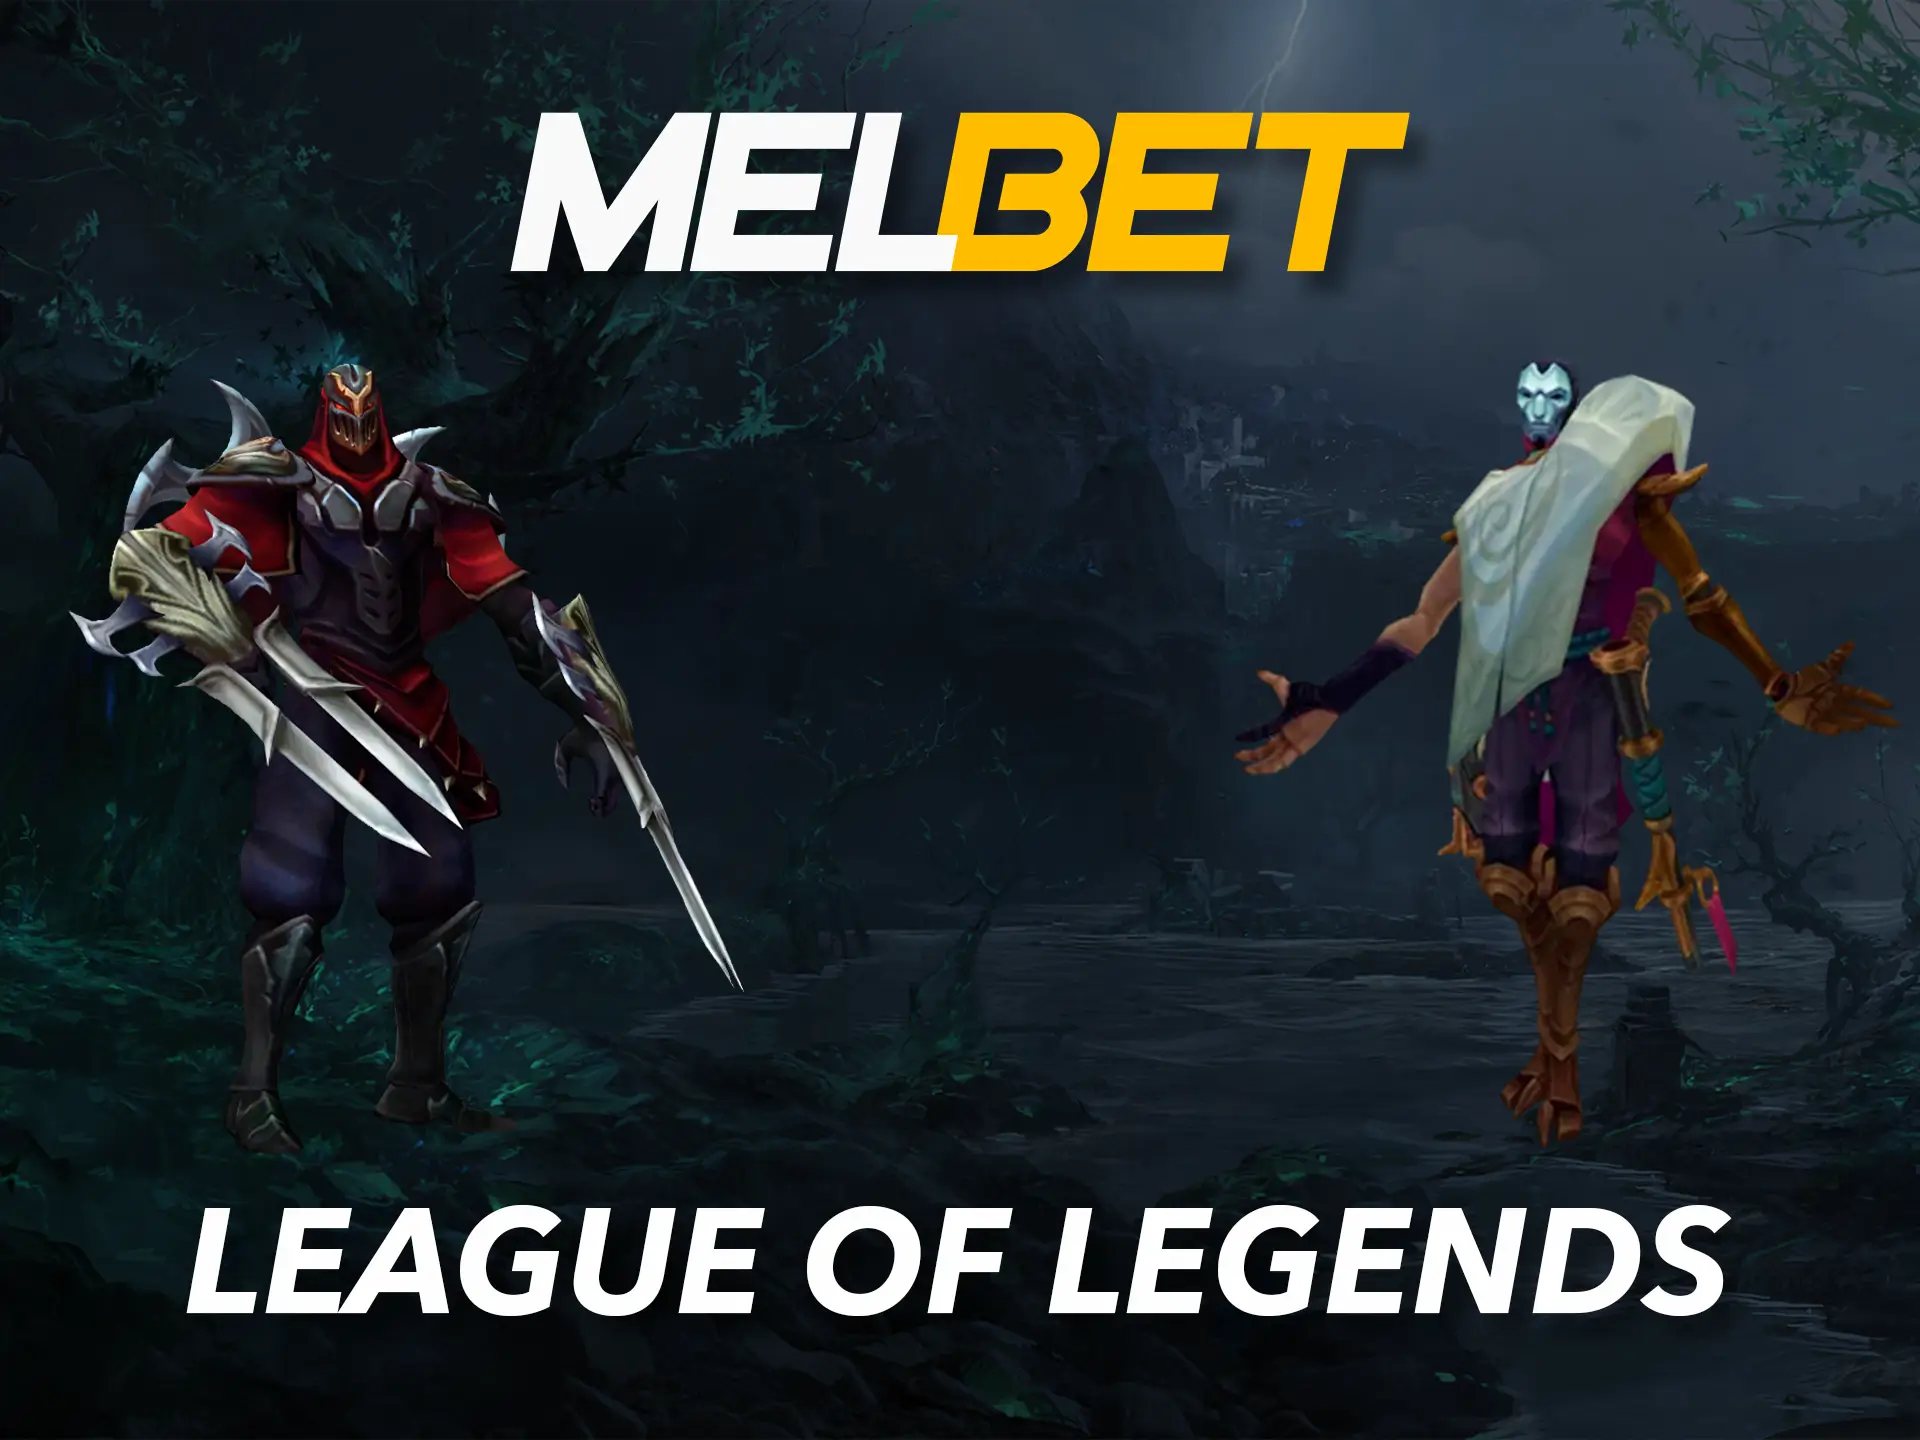 Bet your predictions on League of Legends tournaments at Melbet bookmaker.